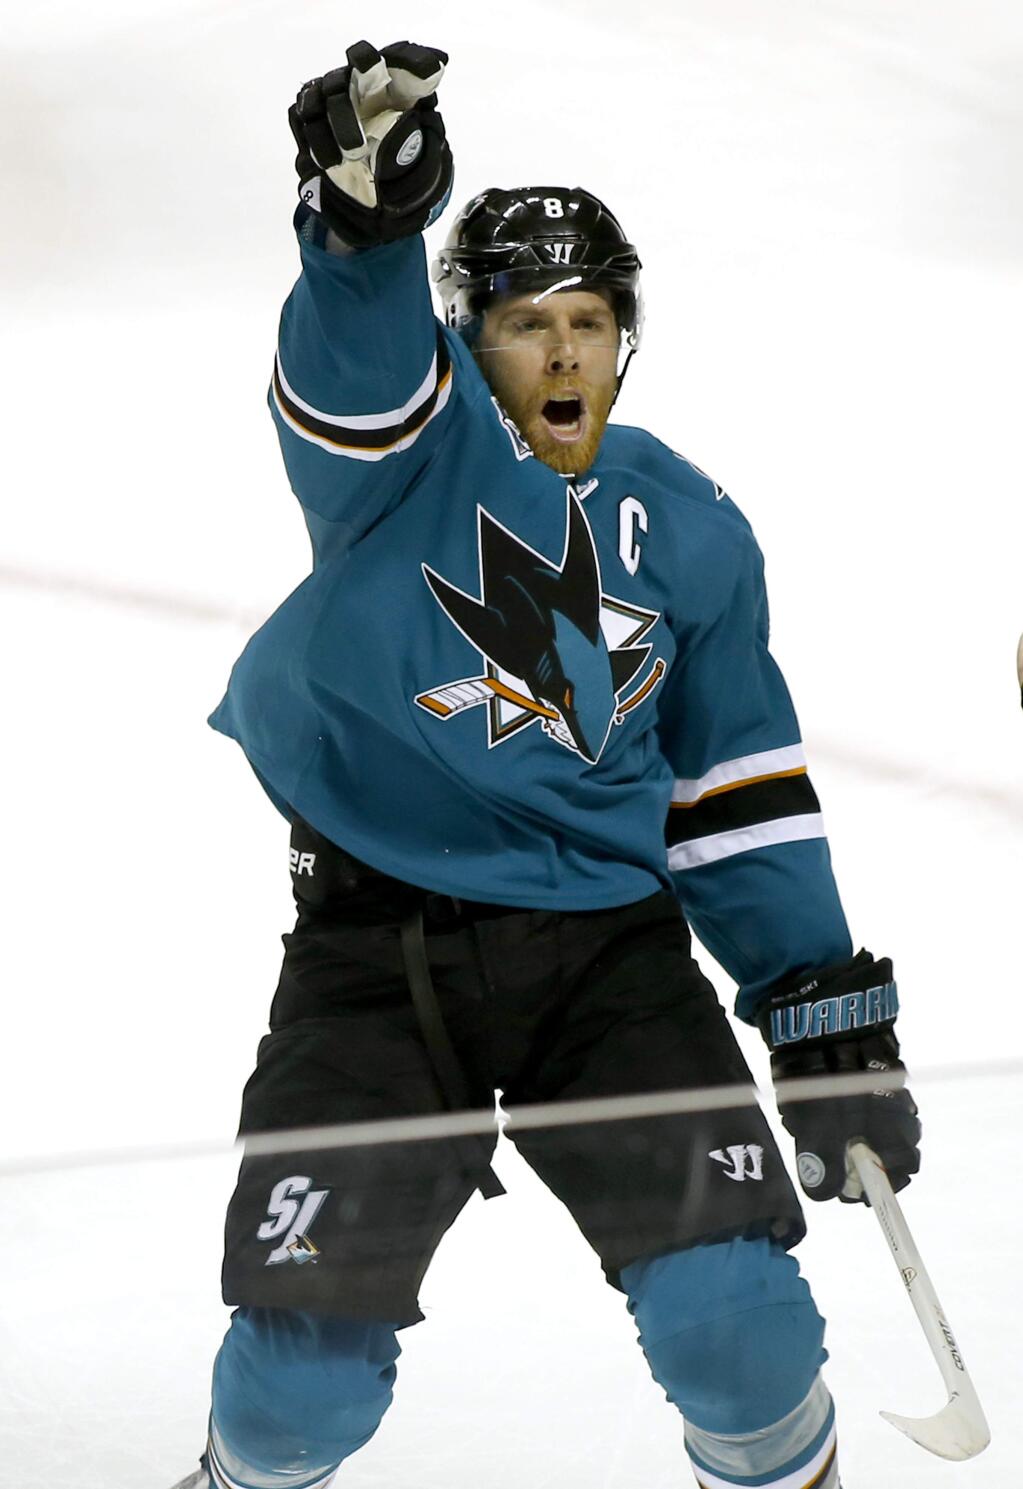 San Jose Sharks center Joe Pavelski celebrates after scoring a goal against the Nashville Predators during the third period of Game 2 in an NHL hockey Western Conference semifinal series Sunday, May 1, 2016, in San Jose, Calif. Sharks won 3-2. (AP Photo/Tony Avelar)